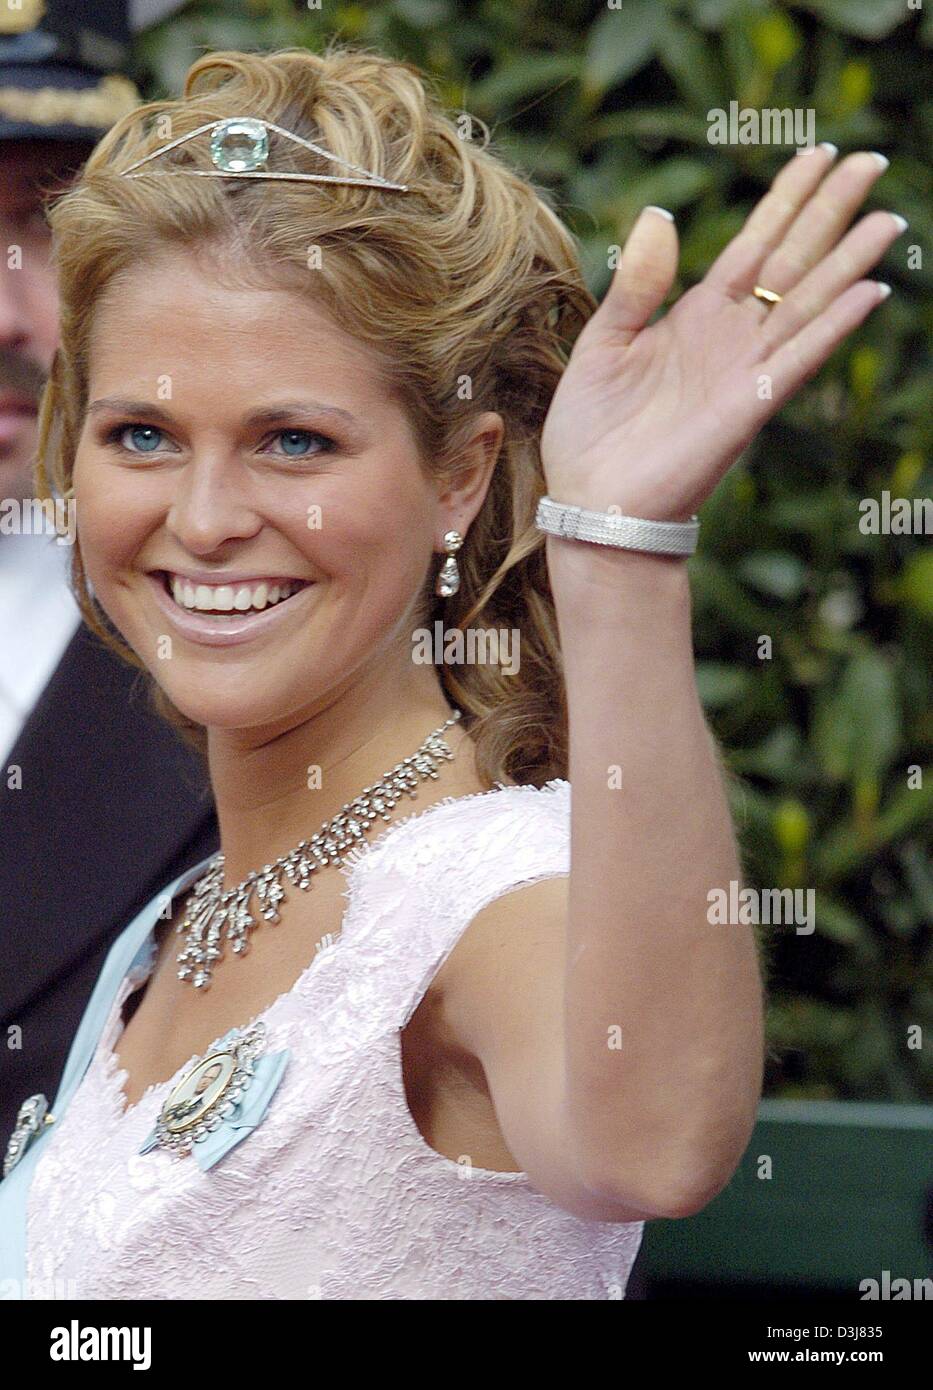 (dpa) - Swedish princess Madeleine smiles and waves her hand as she leaves the cathedrale after the wedding of Danish crown prince Frederik and Mary Donaldson in Copenhagen, Denmark, Friday, 14 May 2004. Members of all European royal dynasties were among the 800 invited guests who attended the wedding. Stock Photo